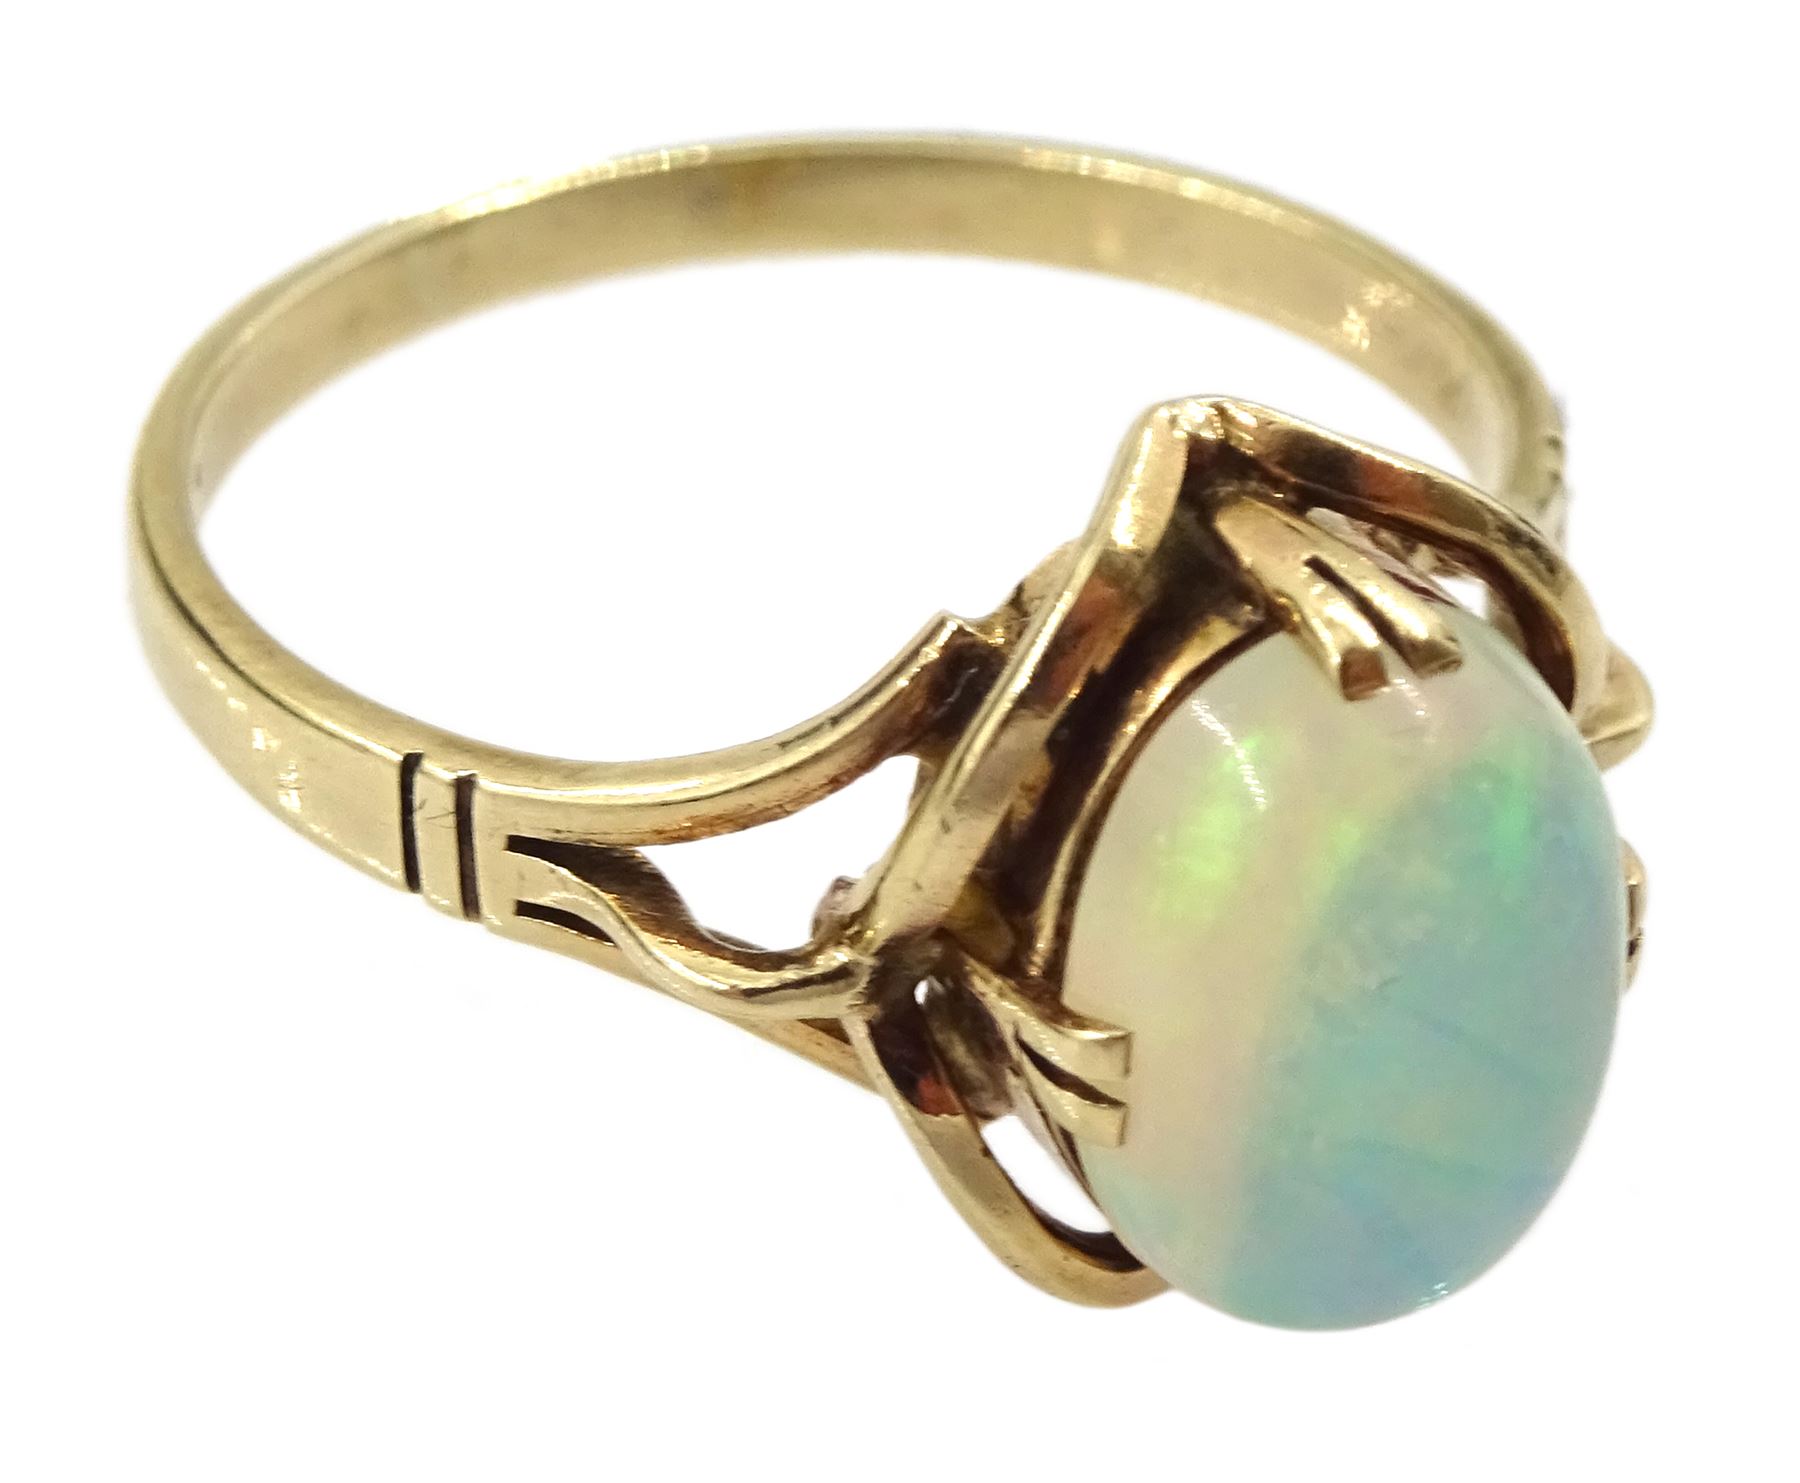 Gold opal ring - Image 2 of 2